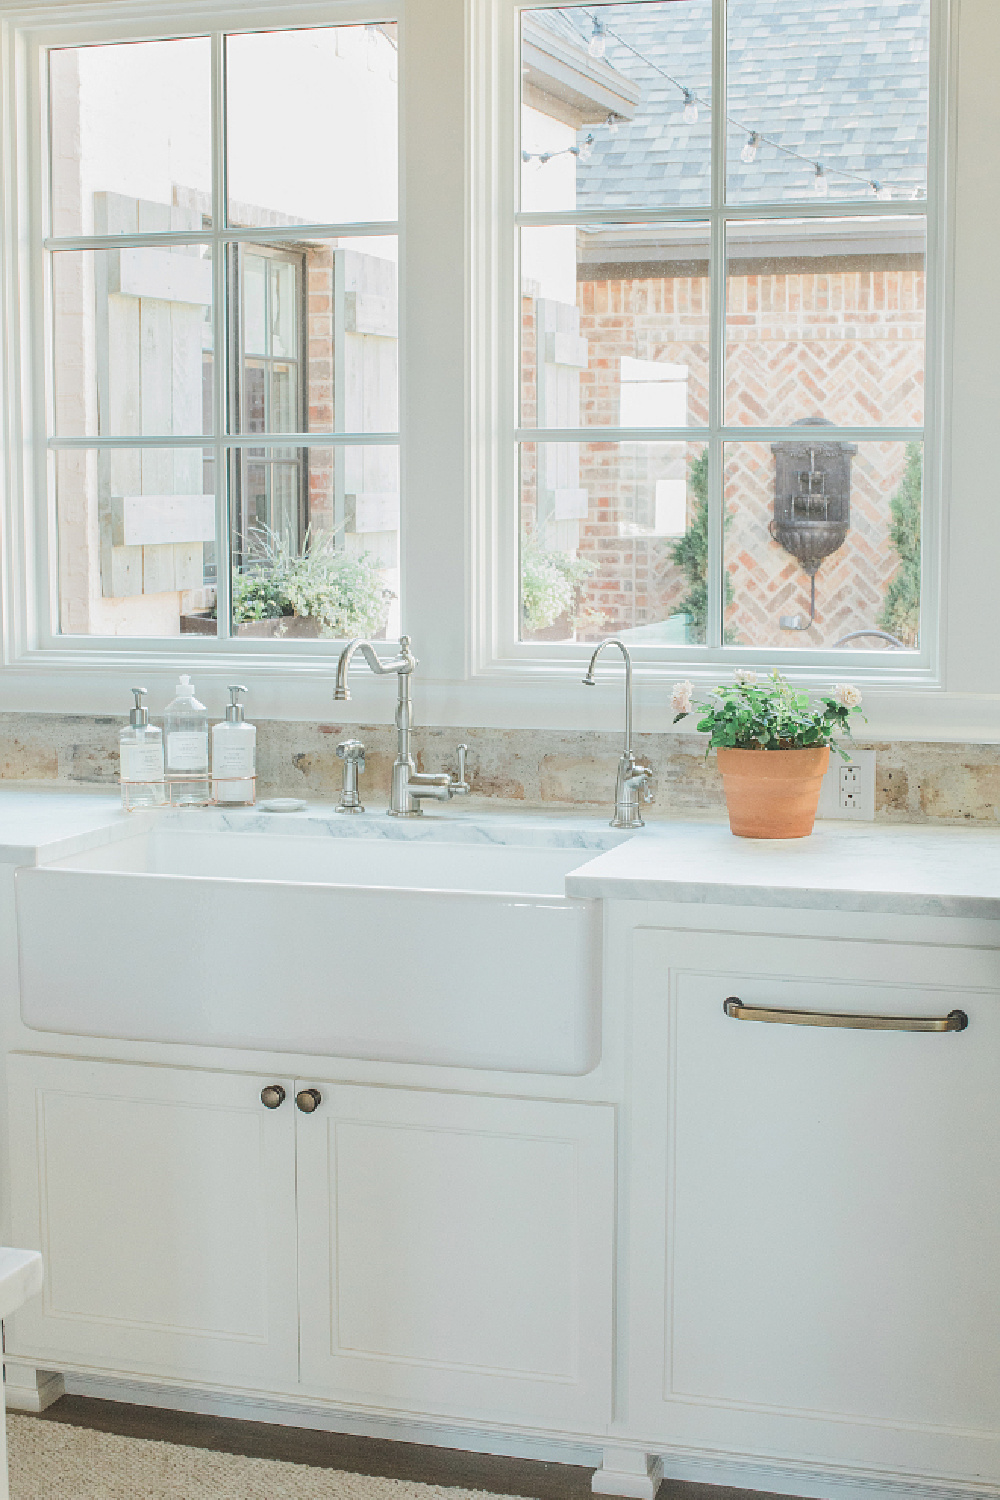 Rustic elegant French country farmhouse white kitchen with farm sink, reclaimed Chicago brick backsplash, and window overlooking courtyard. Brit Jones Design.